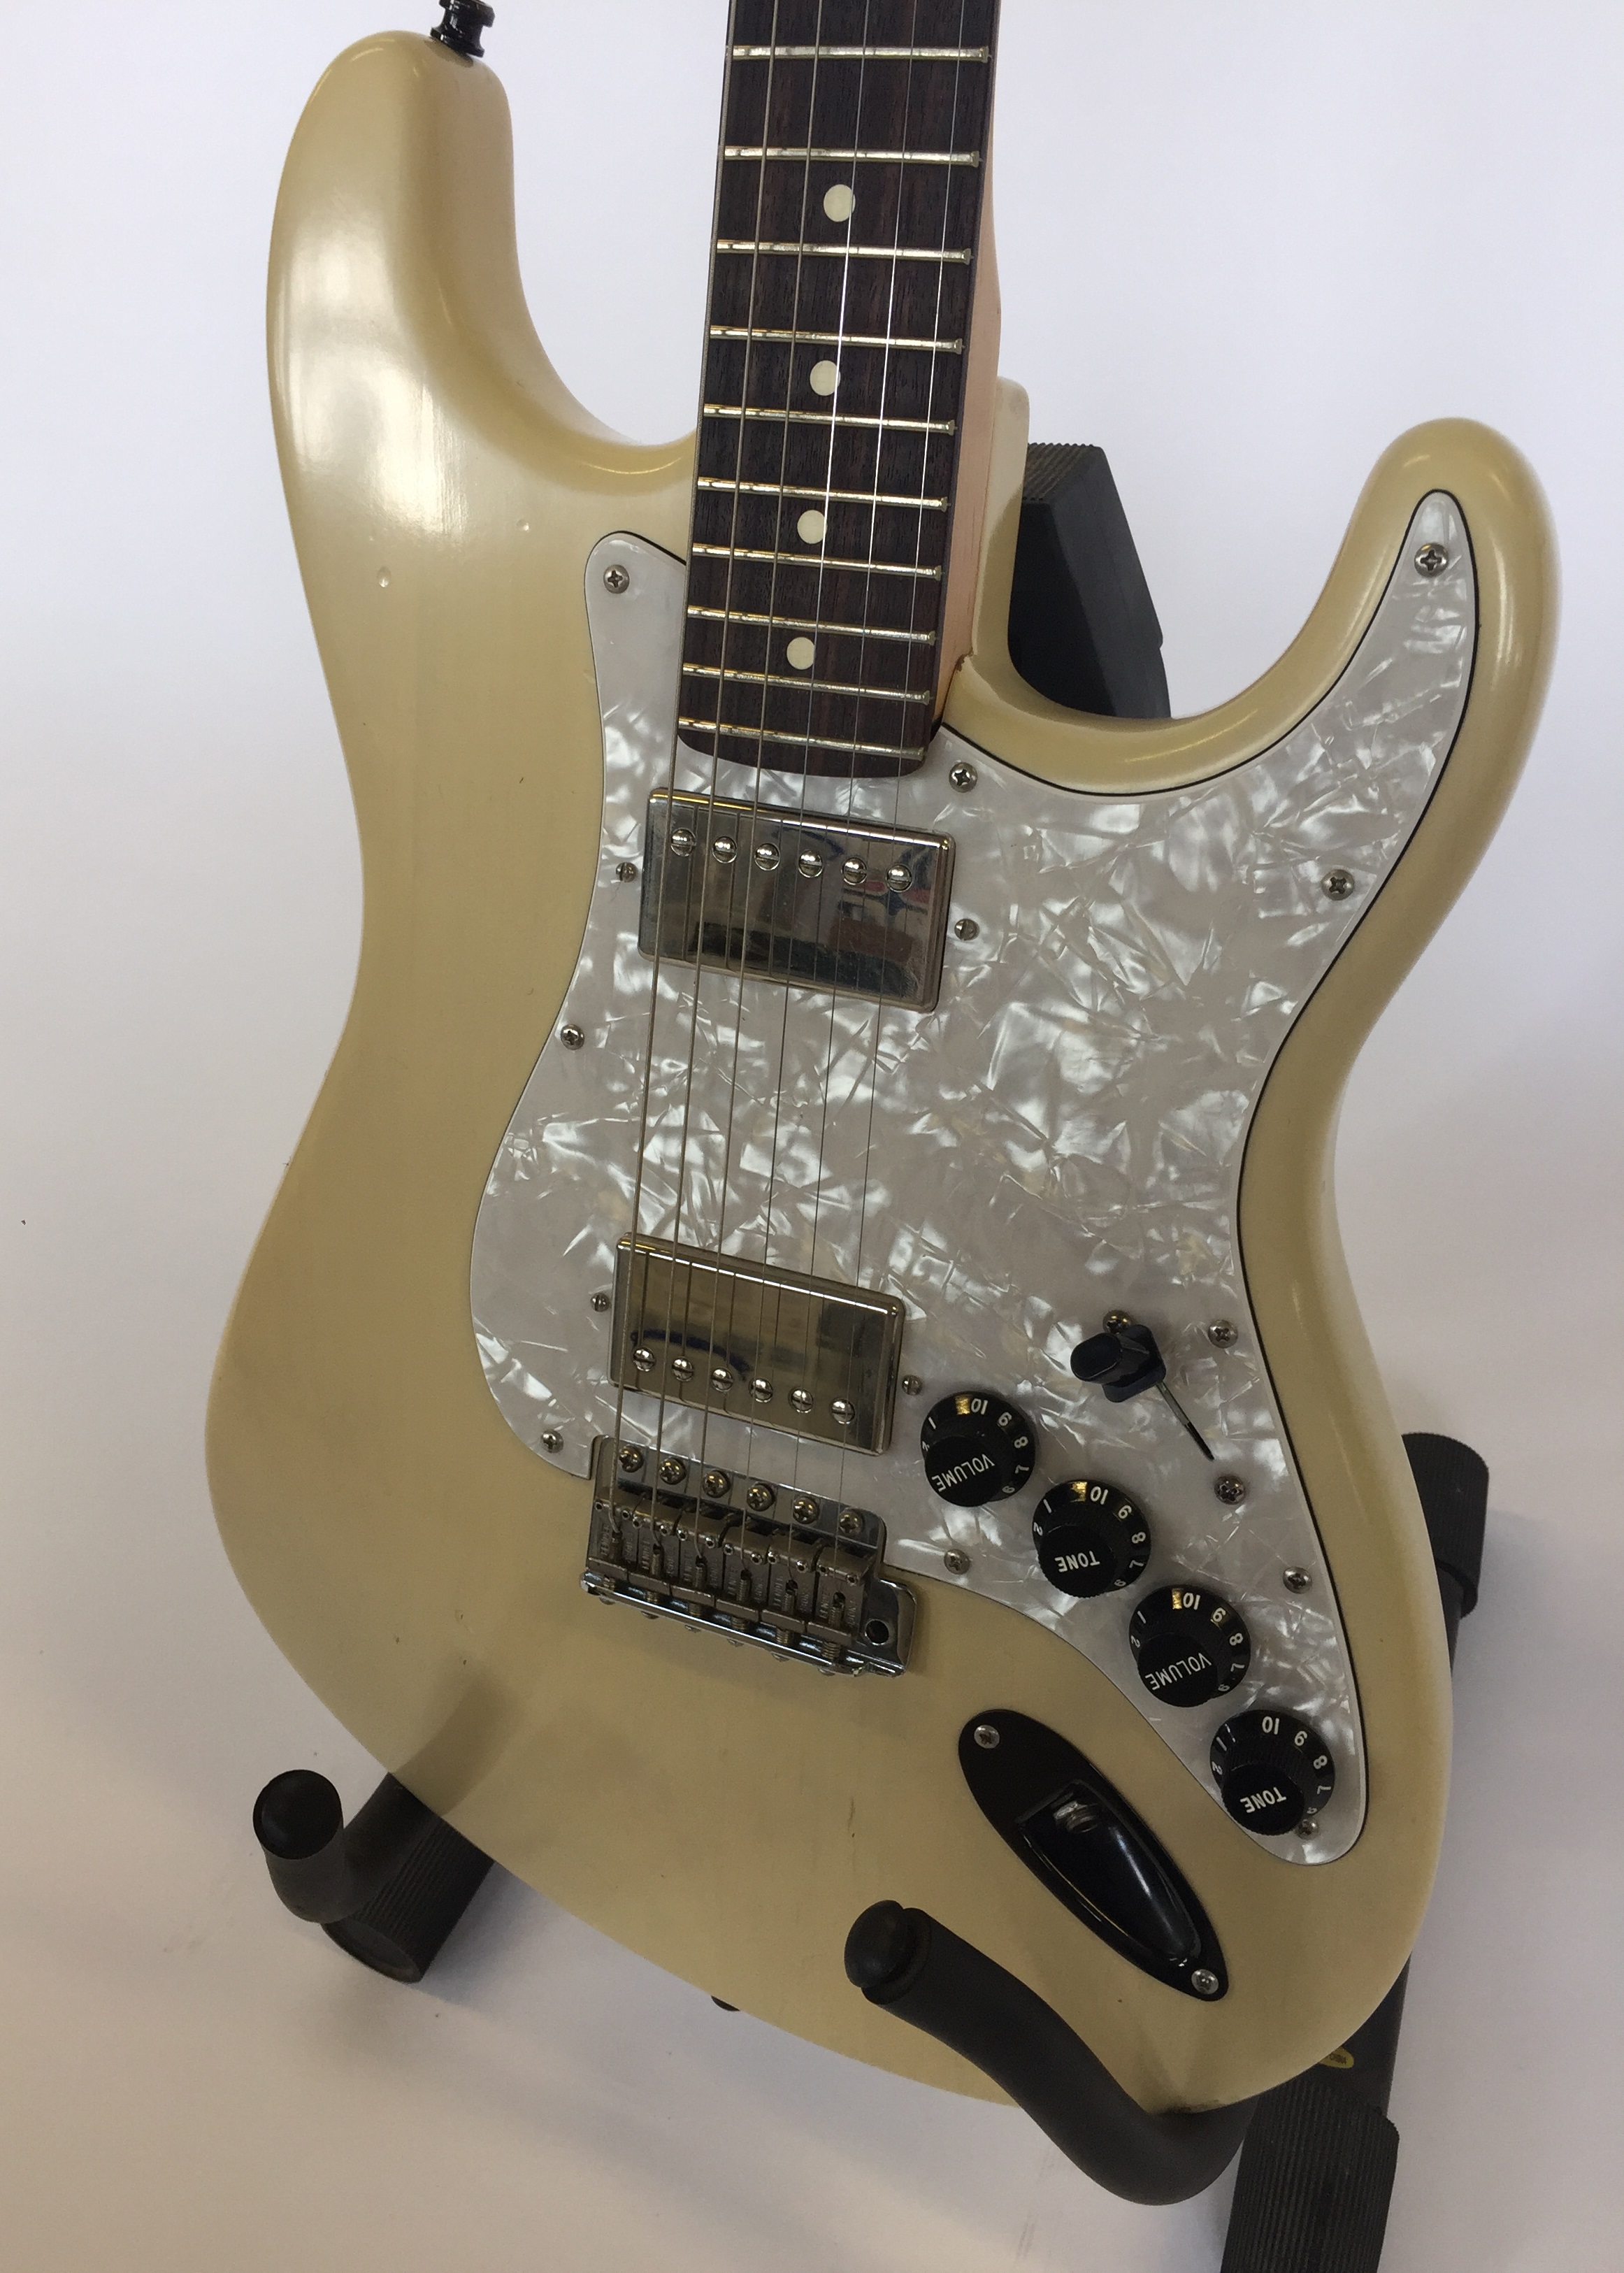 CUSTOM BUILT REPLICA FENDER STRATOCASTER - luthier built guitar with humbuckers, - Image 2 of 8